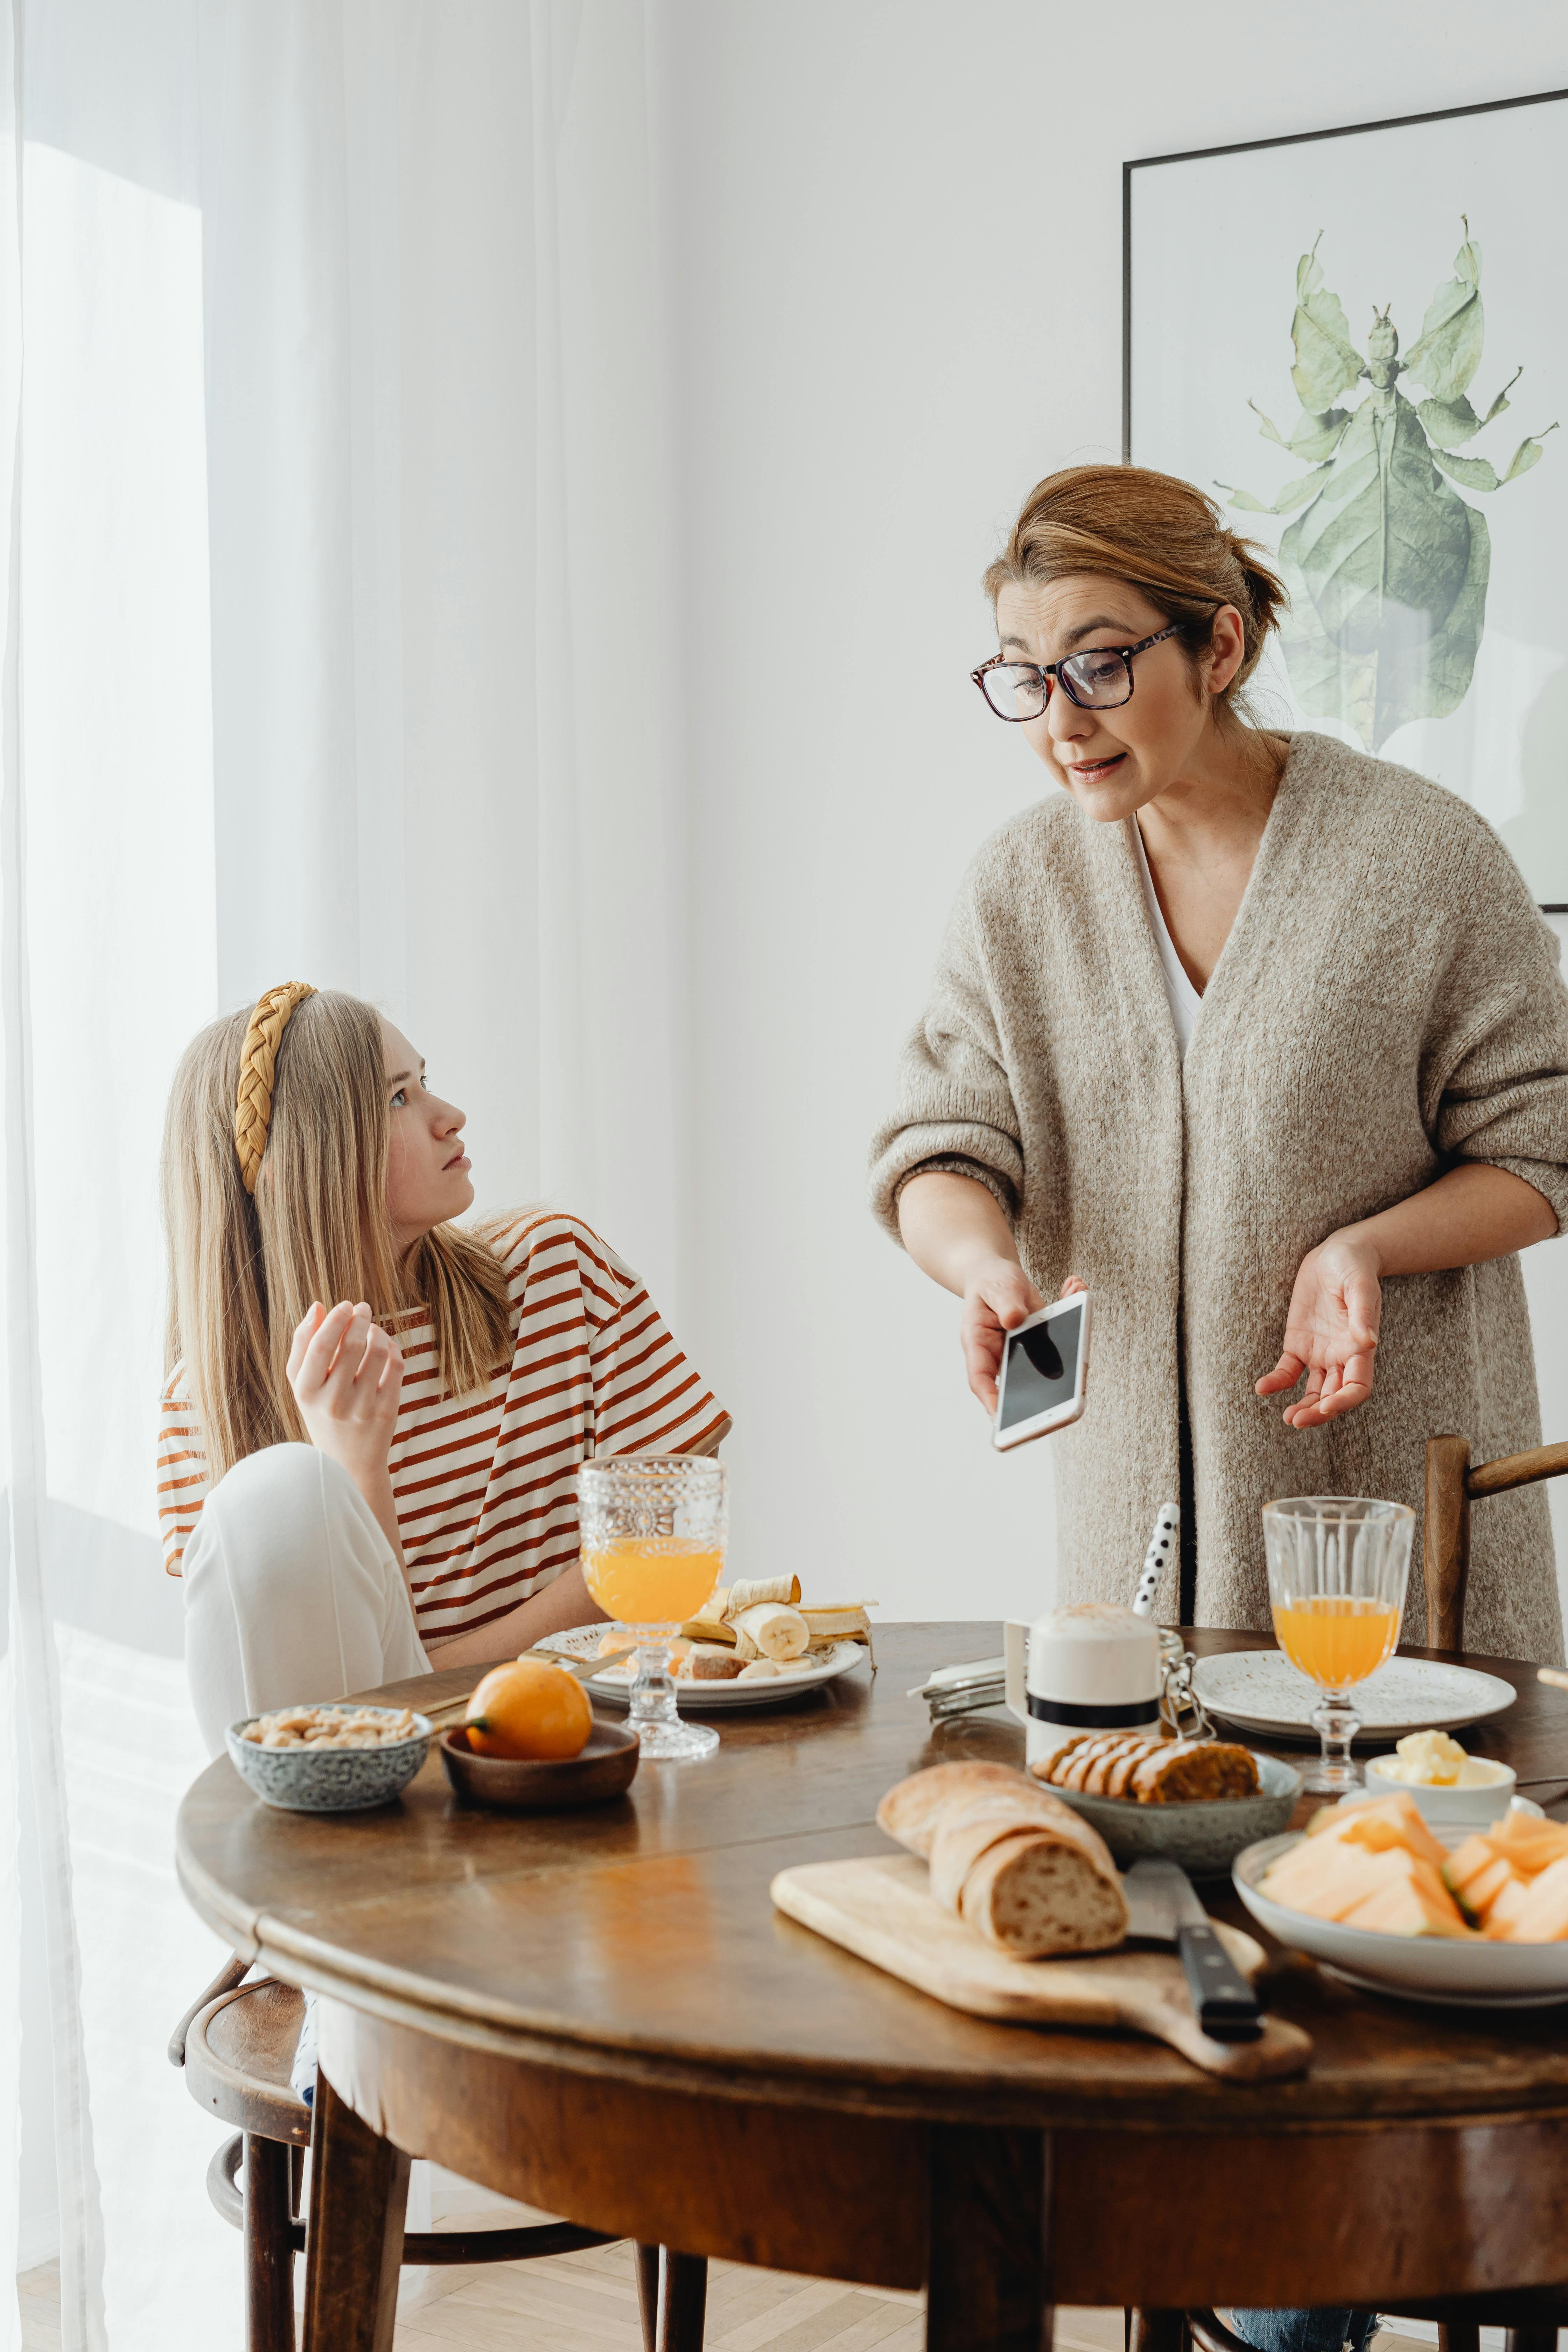 A mother and her daughter arguing during breakfast | Source: Pexels